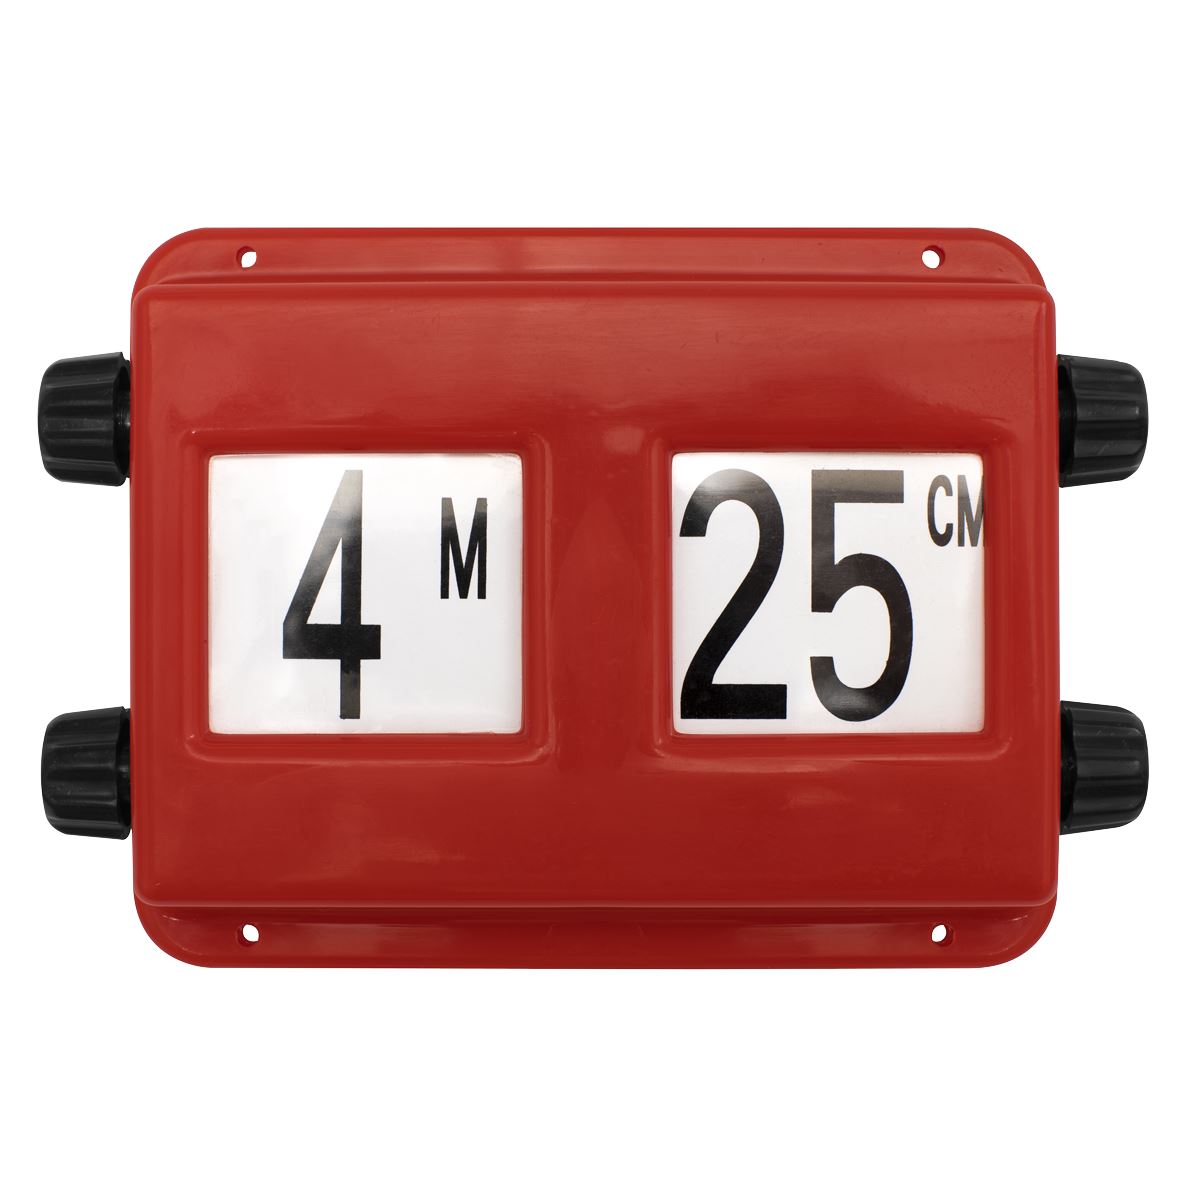 Sealey Commercial Vehicle Height Indicator - Metric